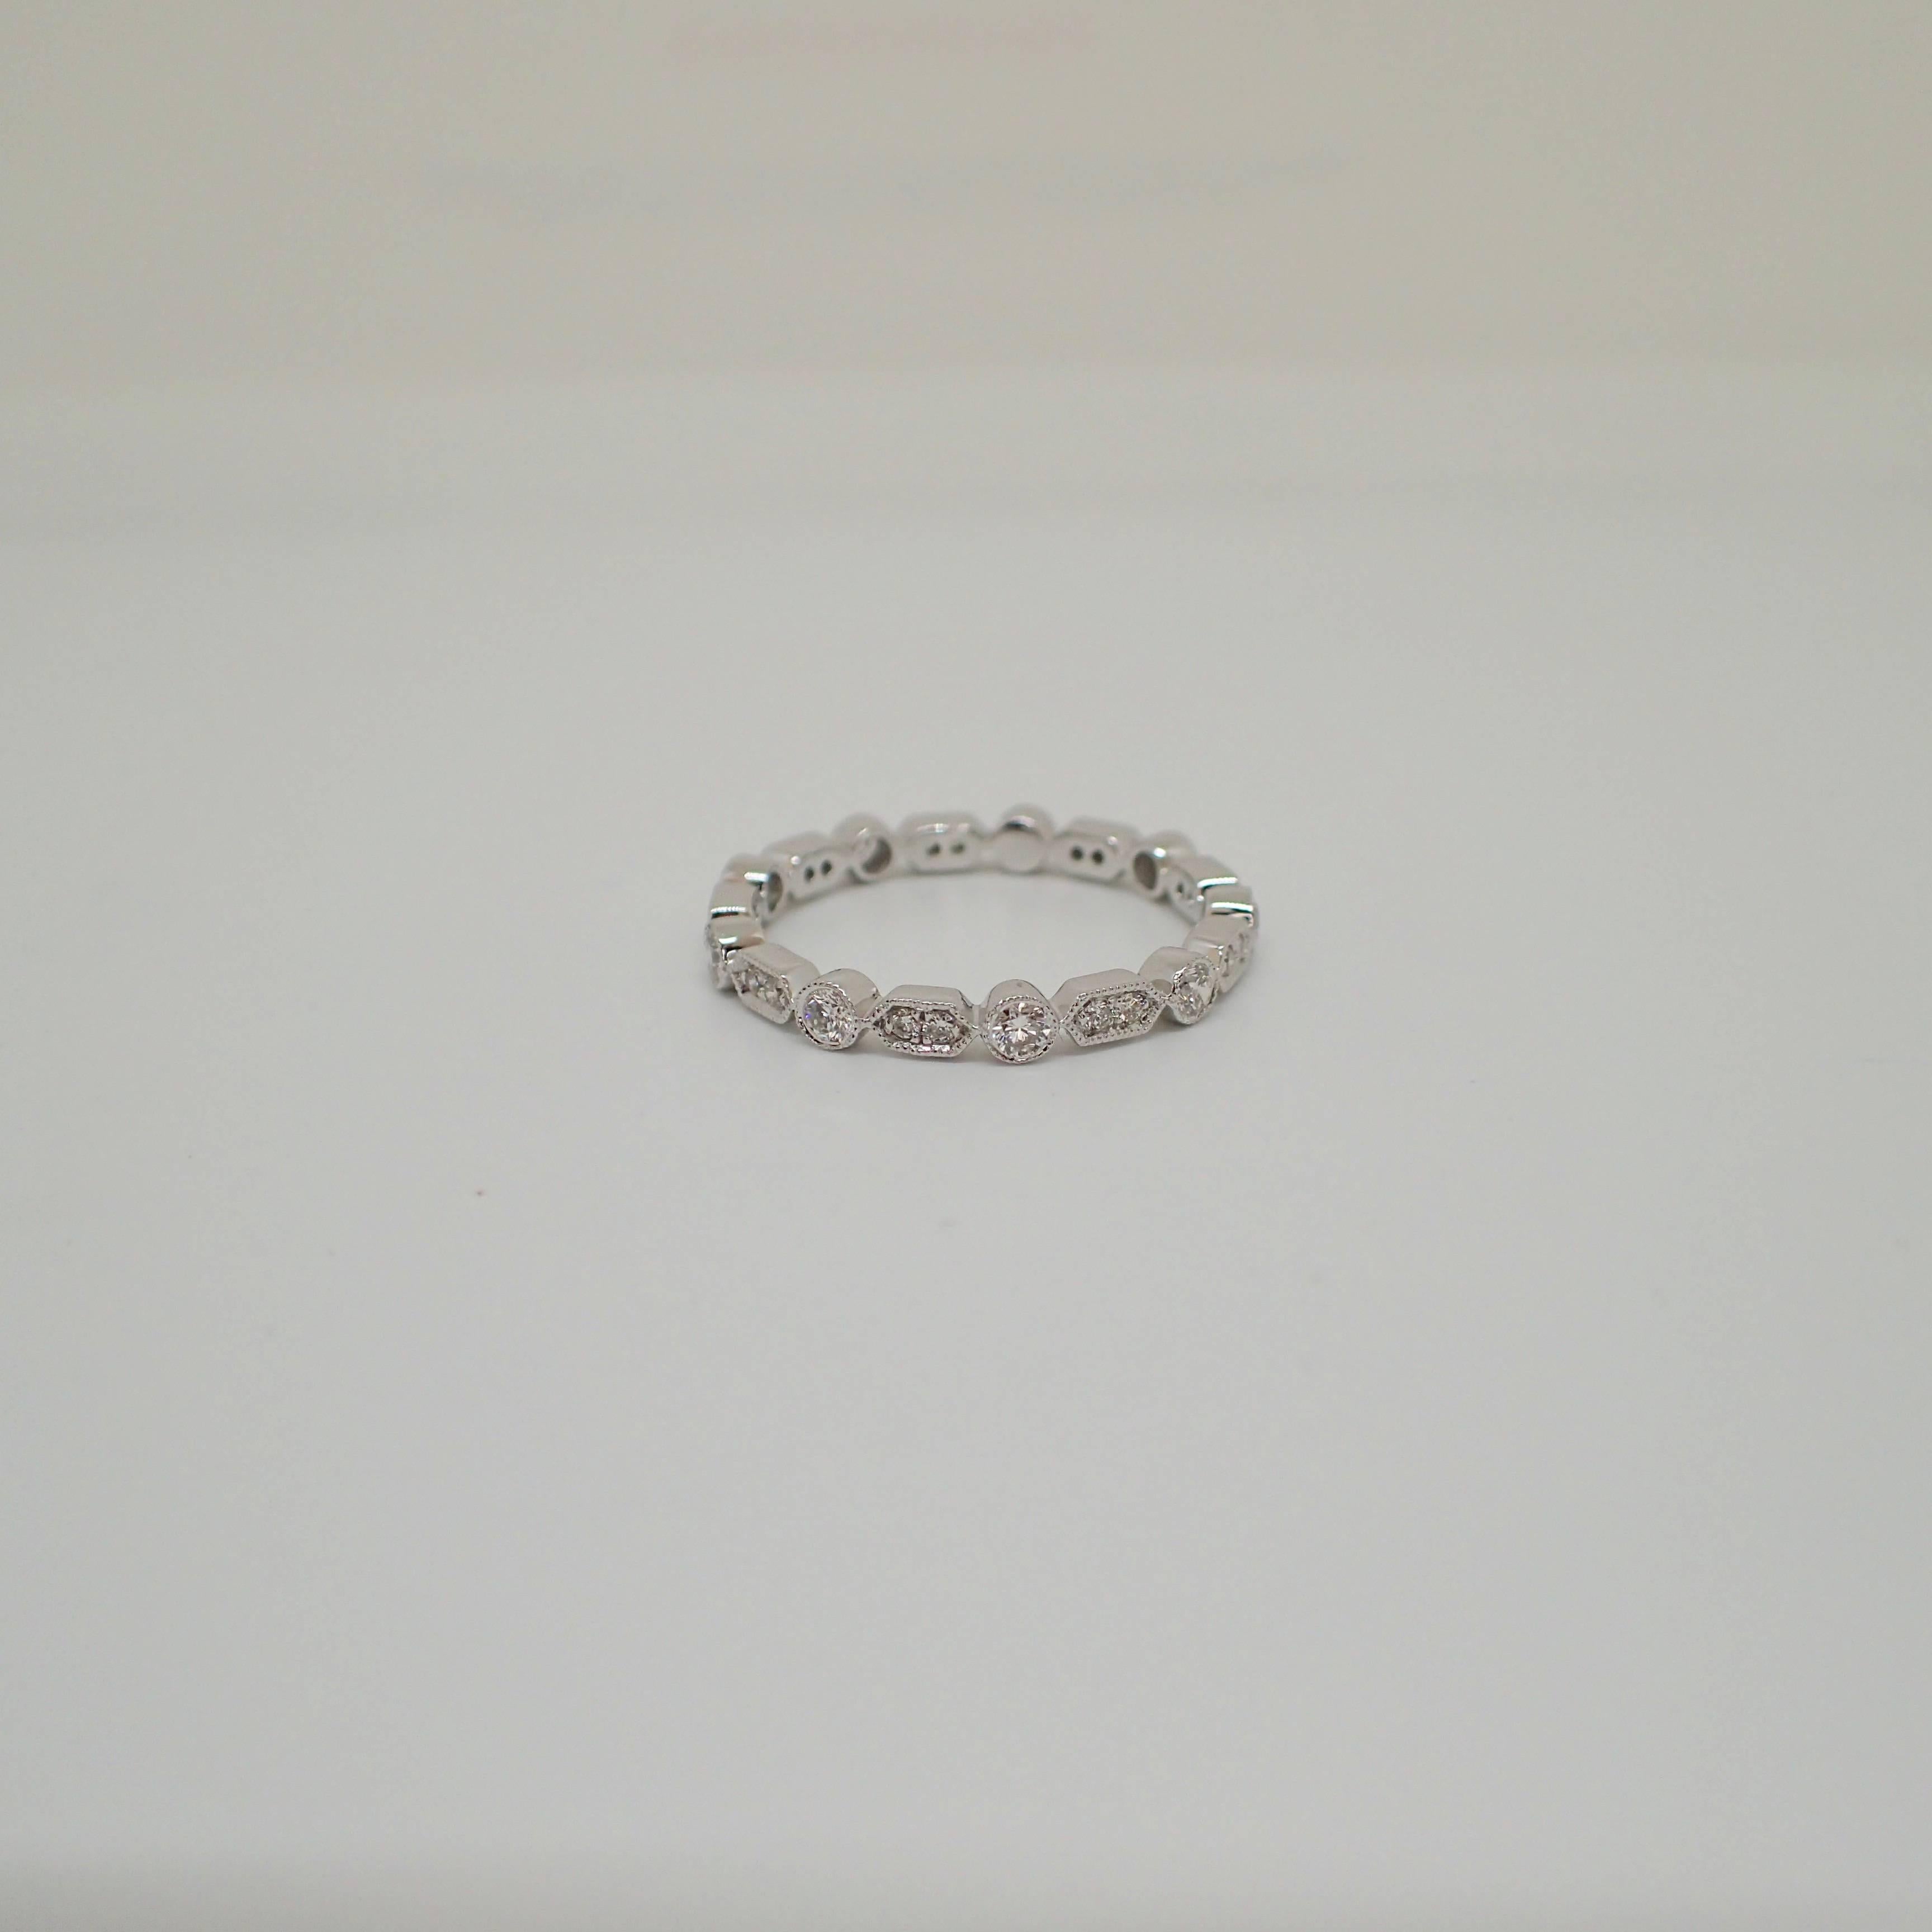 One (1) 18k White Gold eternity band contains twenty-seven (27) Round Brilliant Cut diamonds that weigh a total of 0.44 carats with Clarity Grade VS with Color Grade G, nine (9) of the diamonds are bezel set and eighteen (18) of the diamonds are